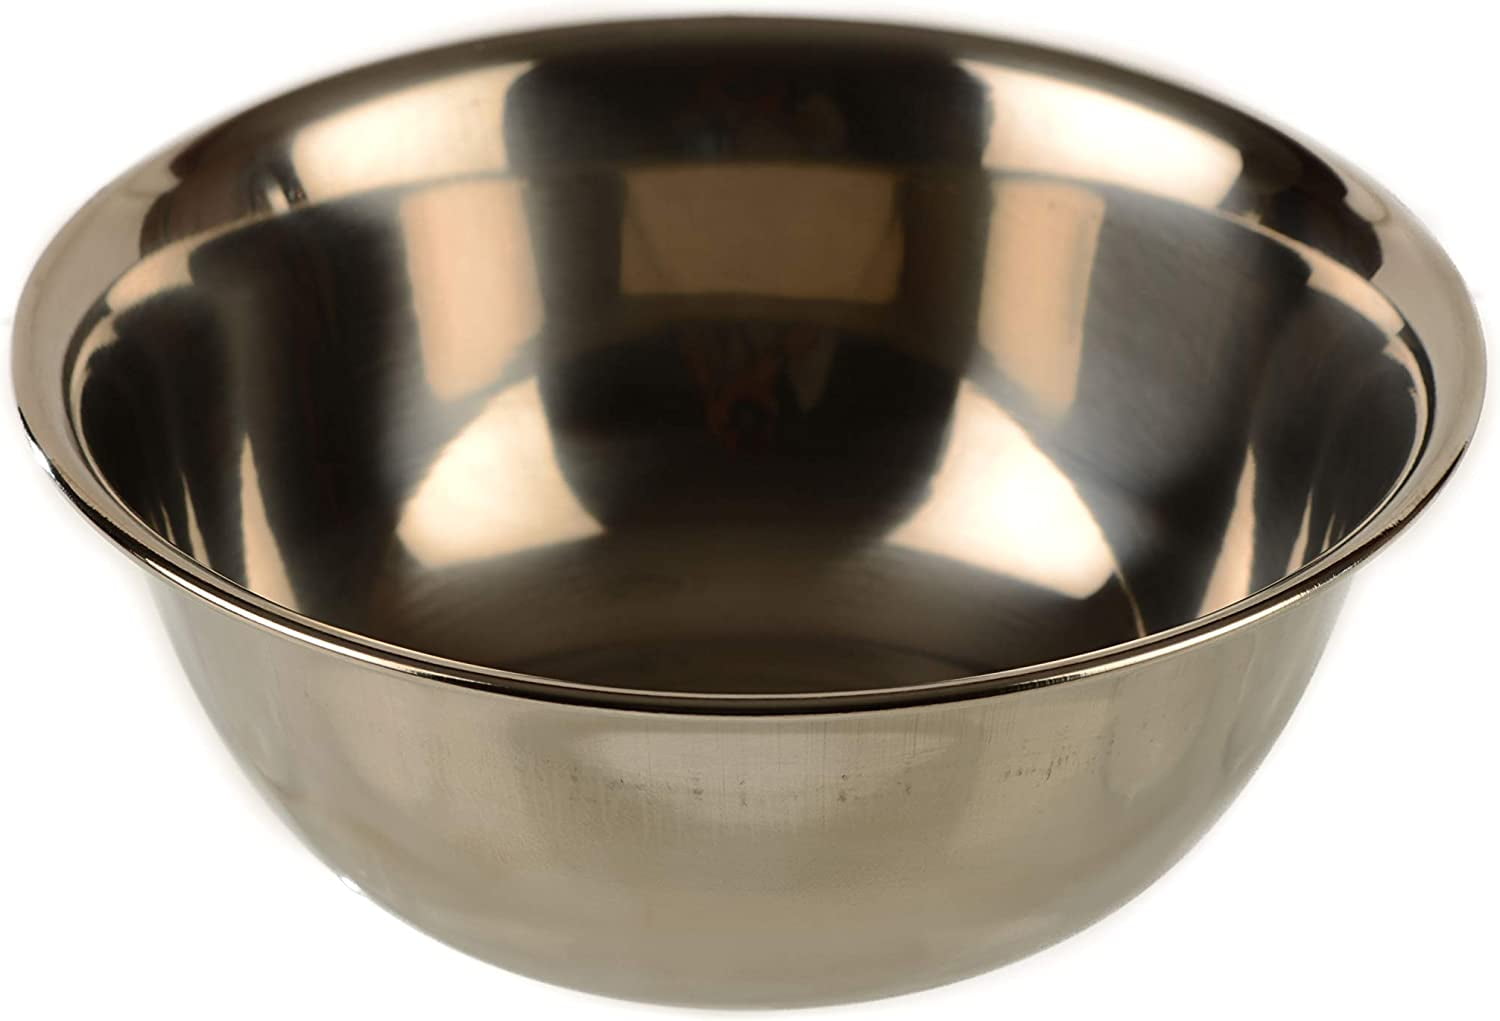 24 PACK] 16 Quart Large Stainless Steel Mixing Bowl - Baking Bowl, Flat  Base Bowl, Preparation Bowls - Great for Baking, Kitchens, Chef's, Home use  by EcoQuality (16 qt) 